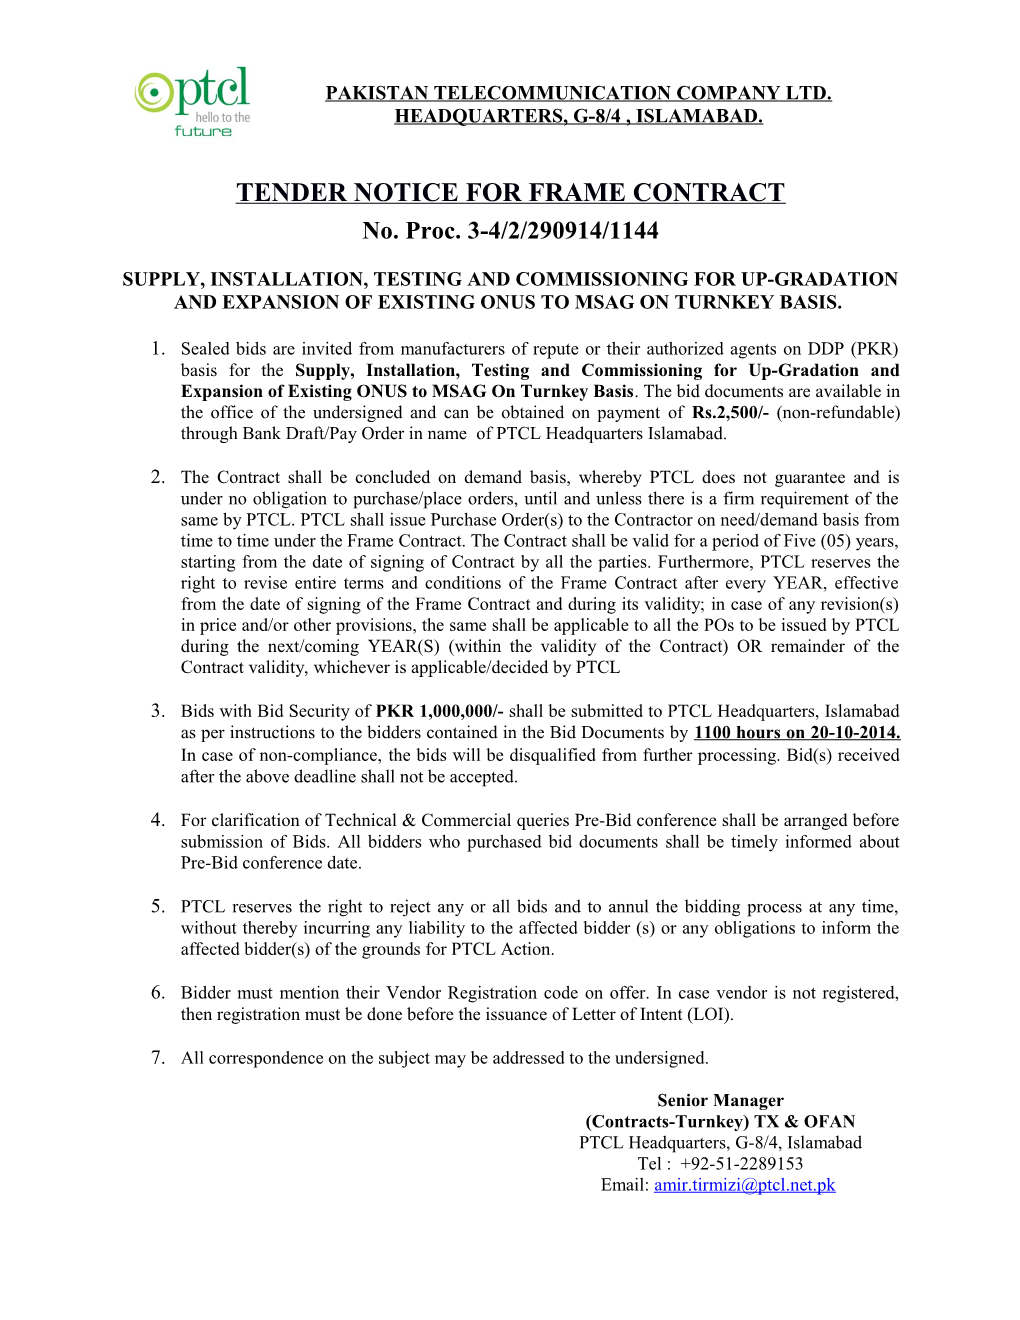 Tender Notice for Frame Contract